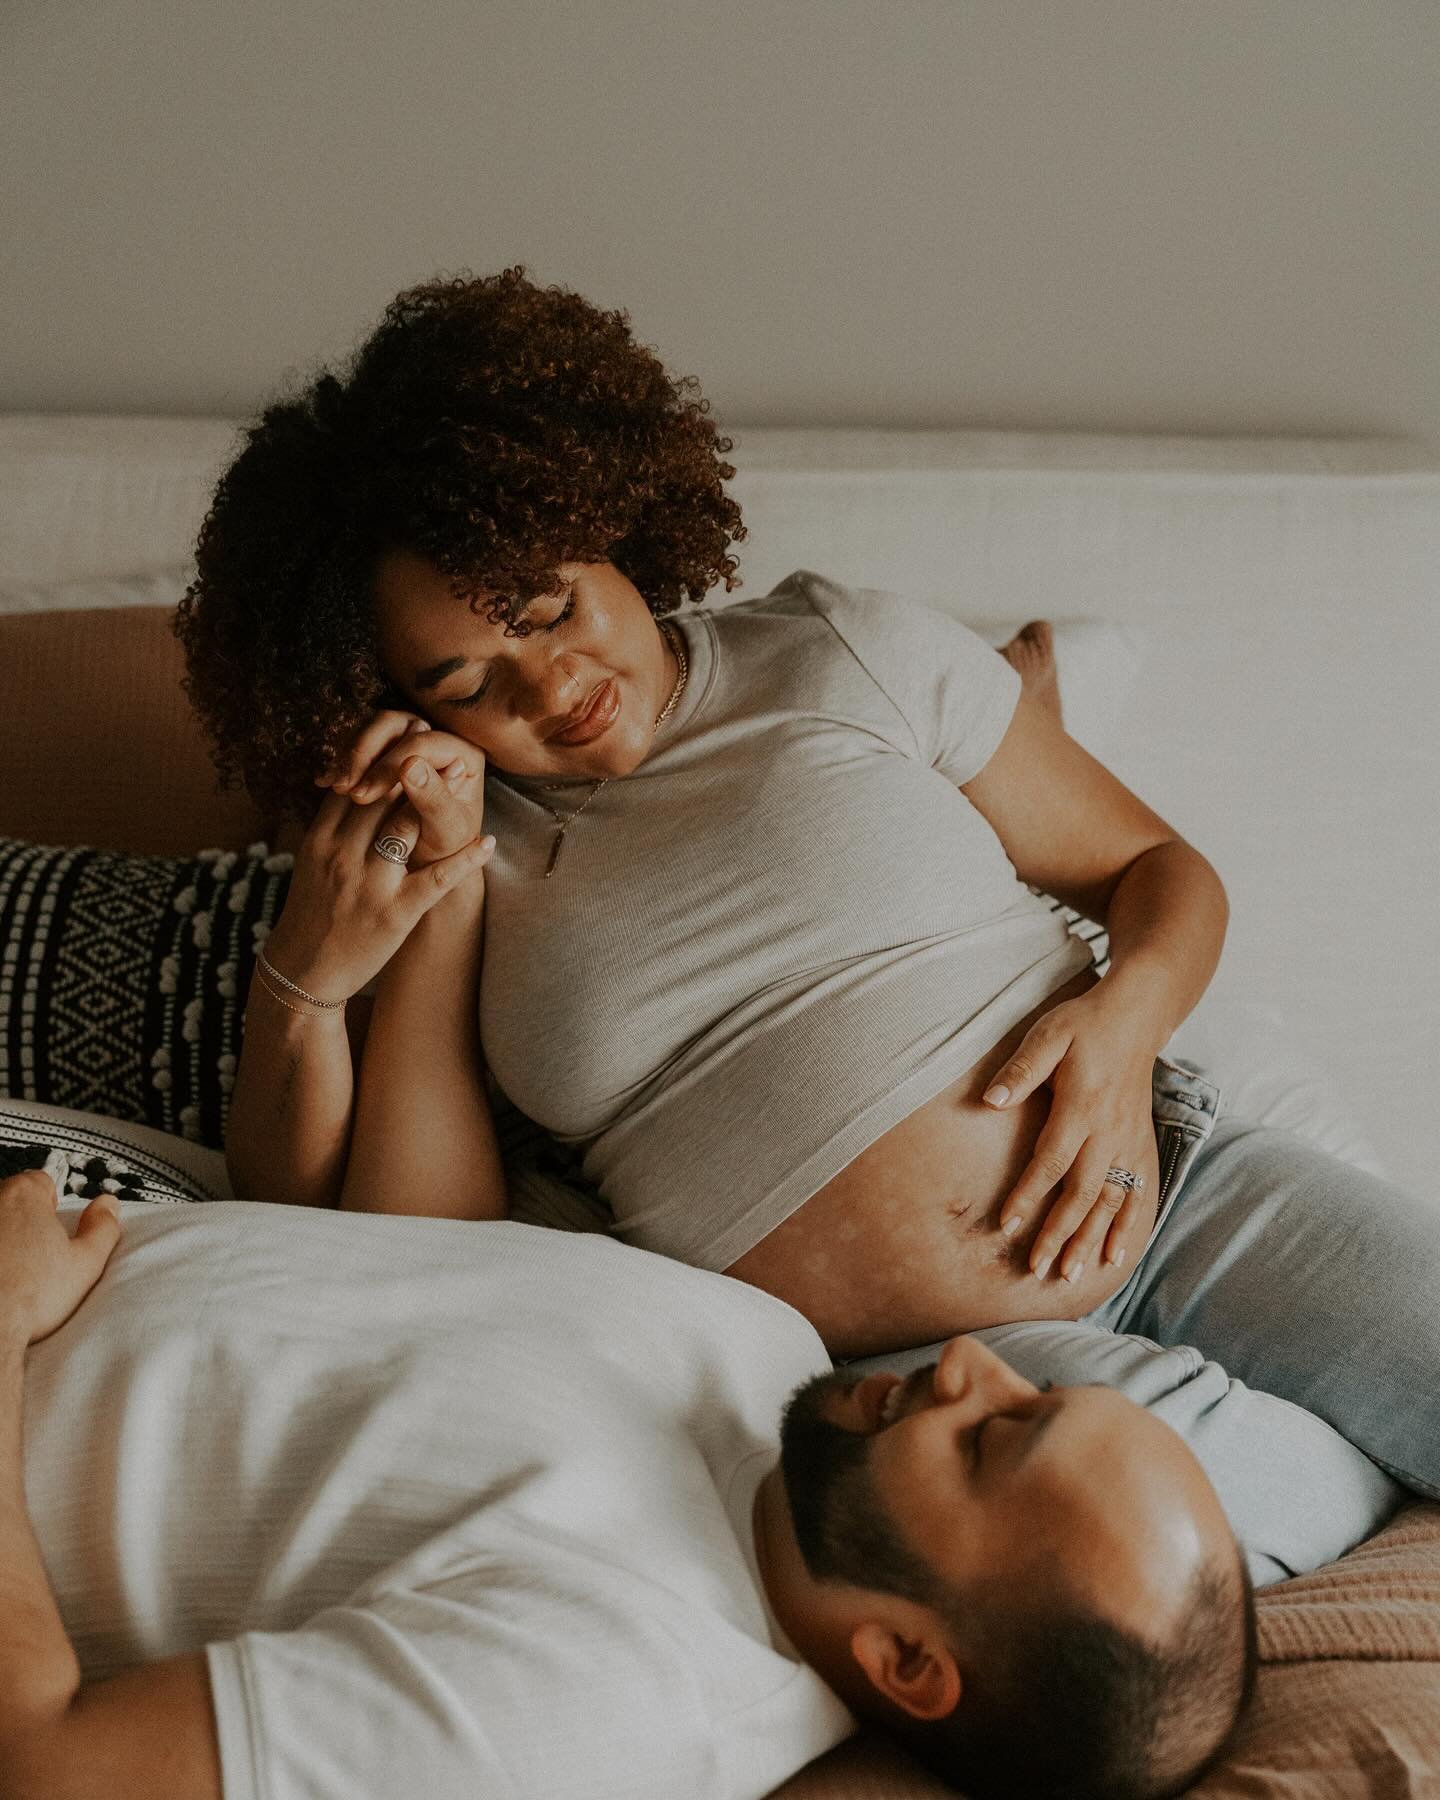 The endless daydreaming about what the babies will look like. What qualities they&rsquo;ll take on from their parents. All of it! The excitement and eagerness that comes with the third trimester just takes you for a ride 💕 
&bull;
&bull;
&bull;
#Mat